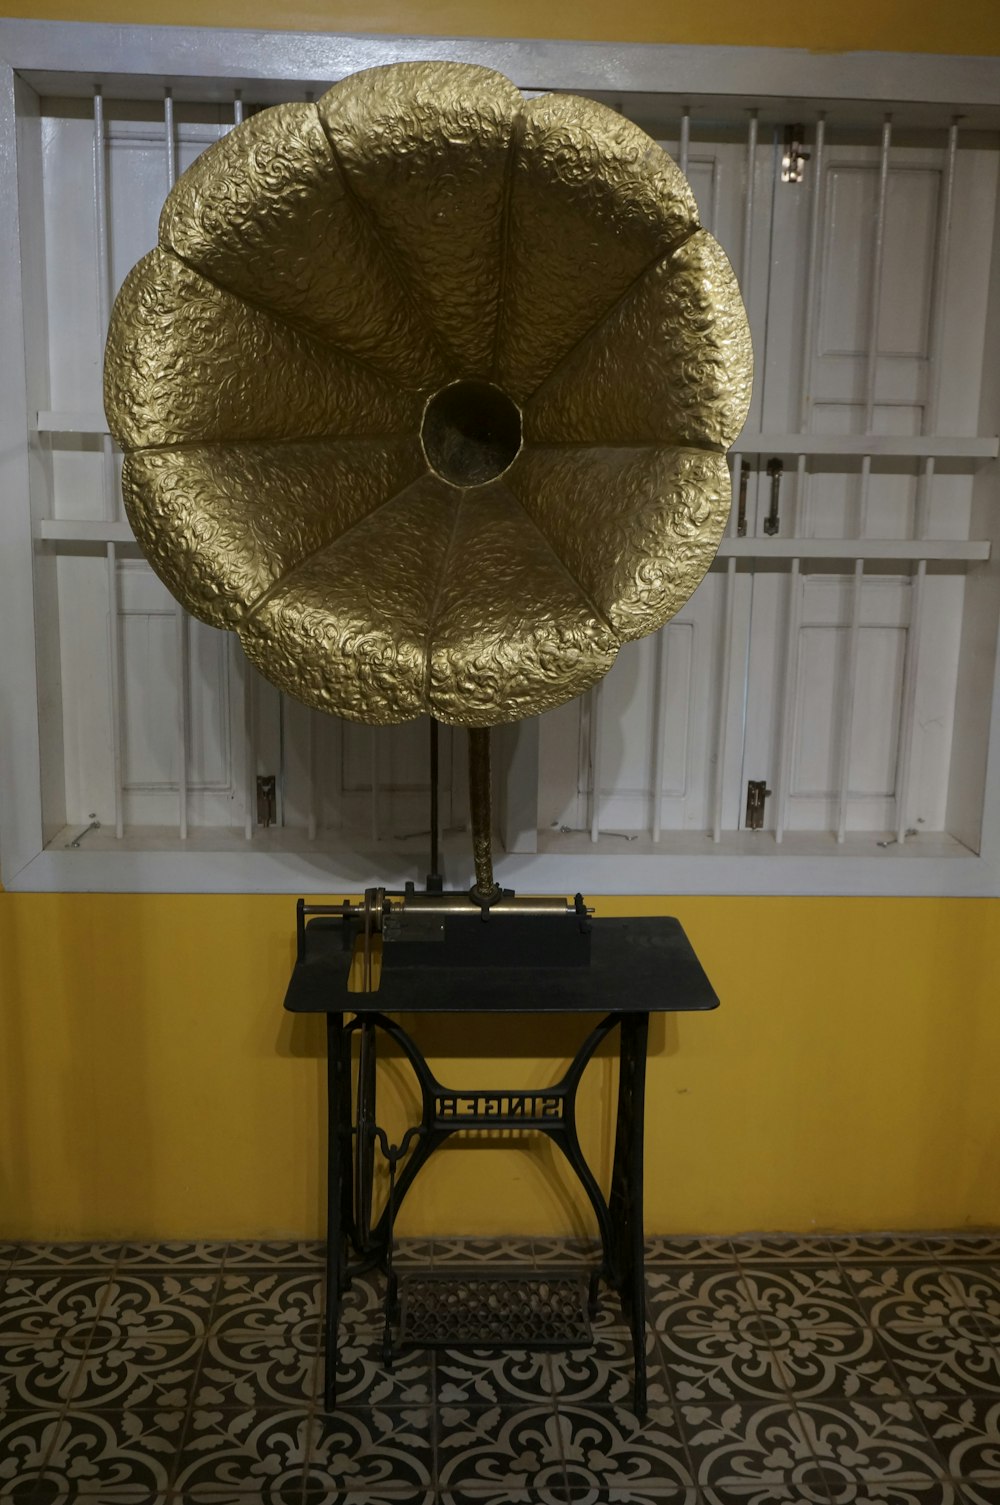 a large metal object on a stand